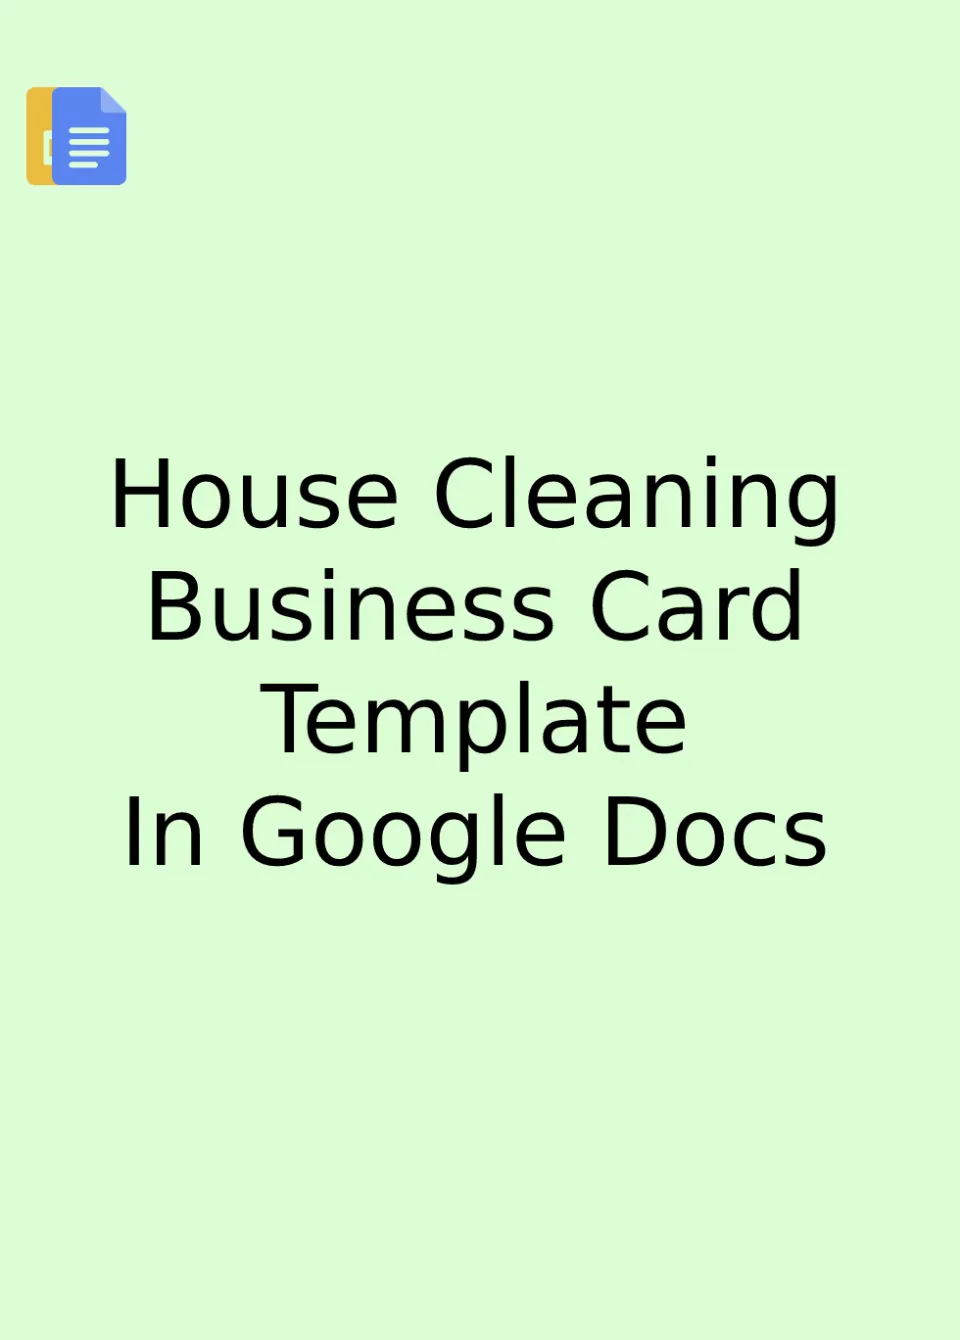 House Cleaning Business Card Template Google Docs